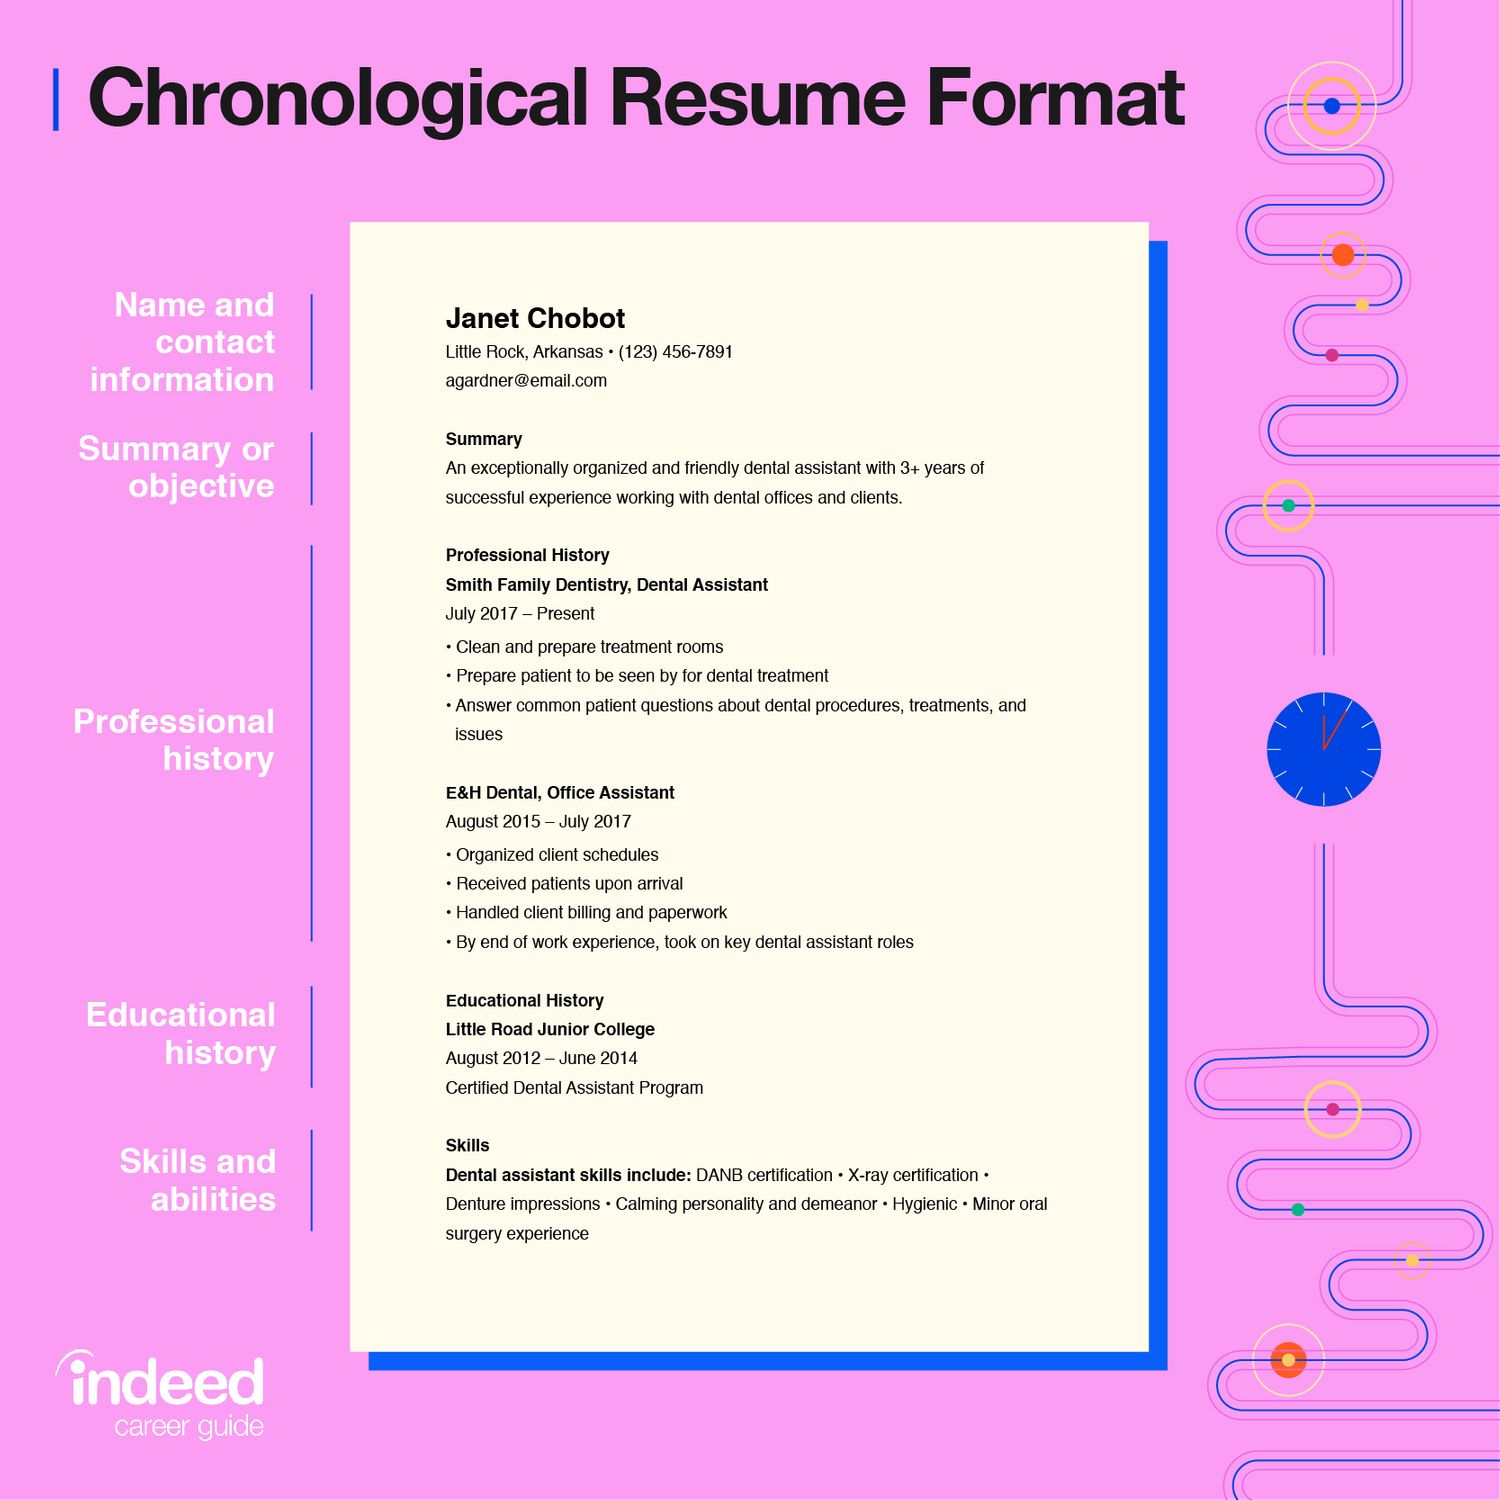 10 Ways to Make Your Resume Easier